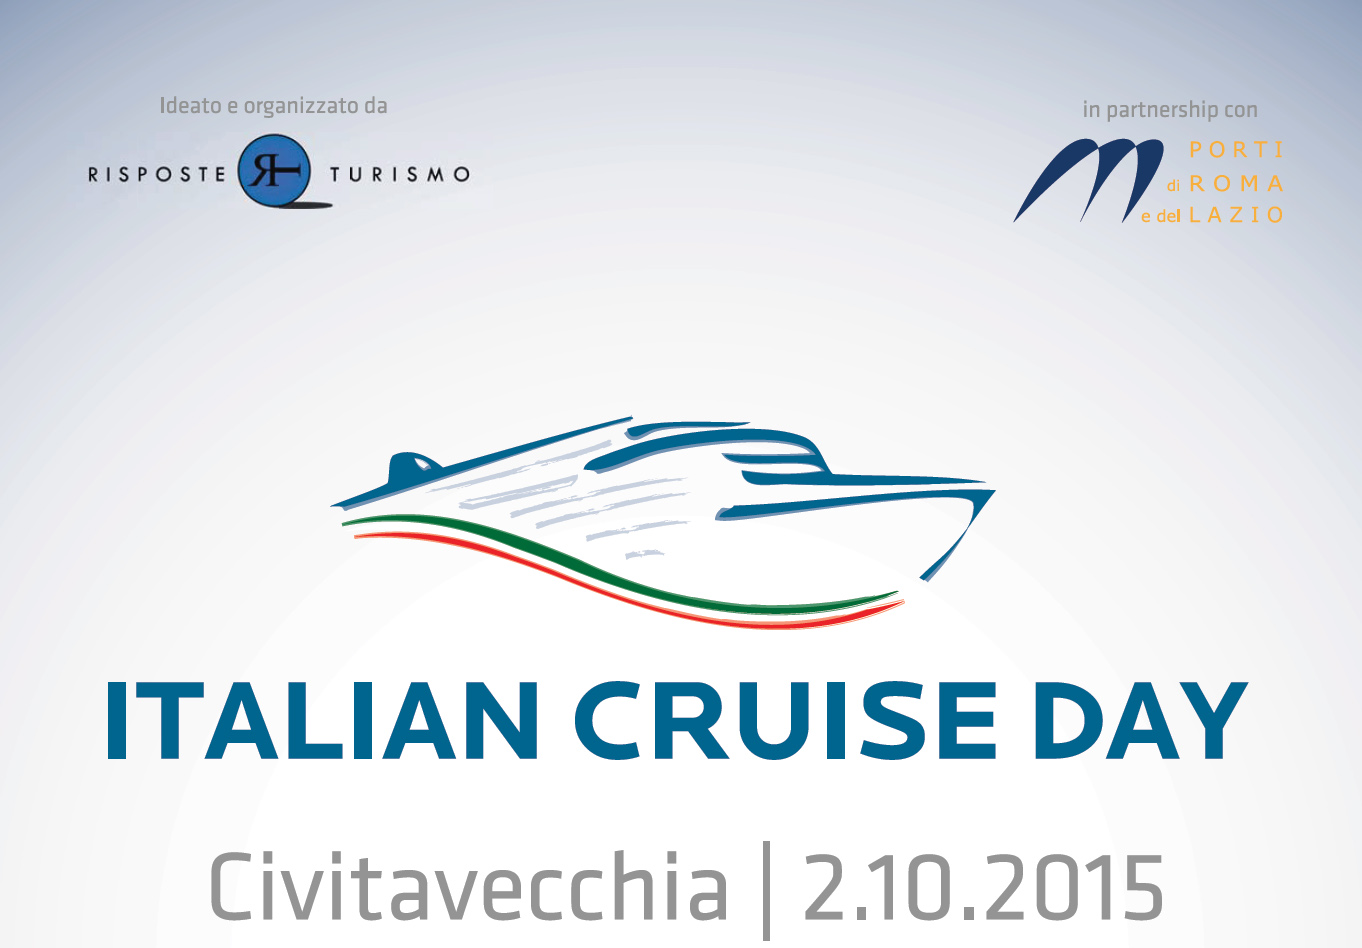 The Italian Cruise Day is the forum of the Italian cruise industry. This year it will take place in Civitavecchia